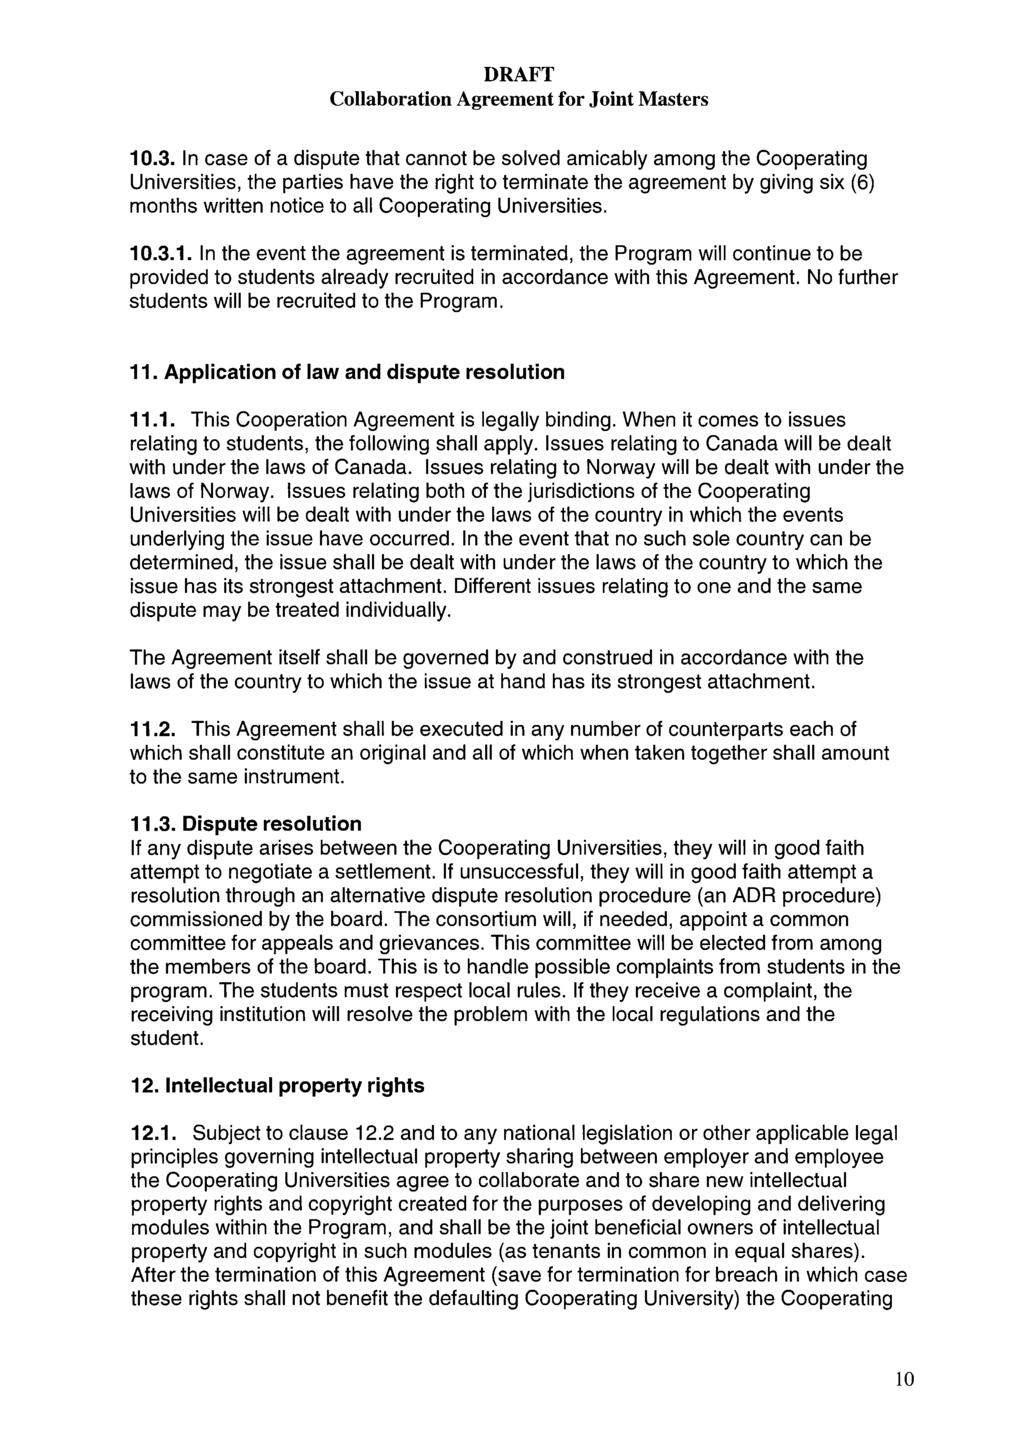 DRAFT Collaboration Agreement for Joint Masters 10.3.